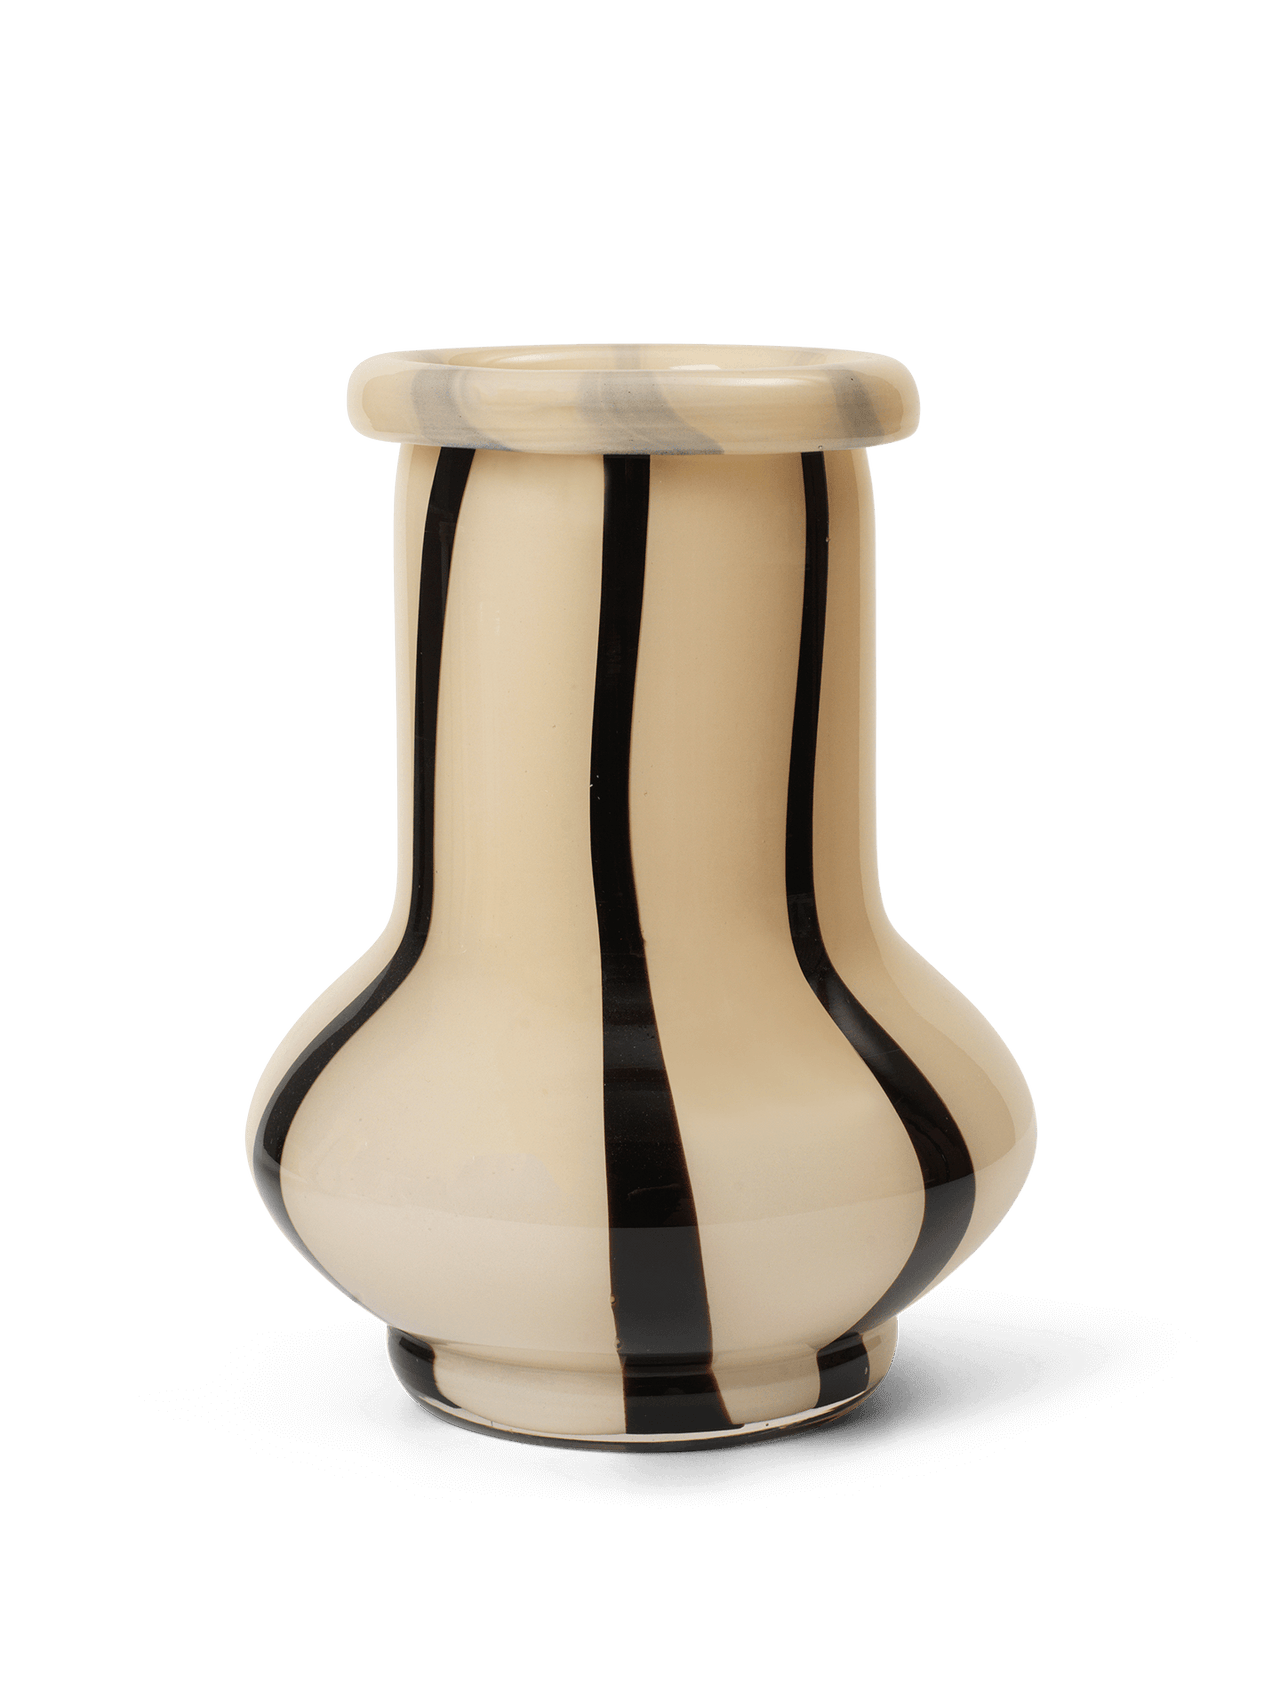 LARGE RIBAN VASE BY FERM LIVING